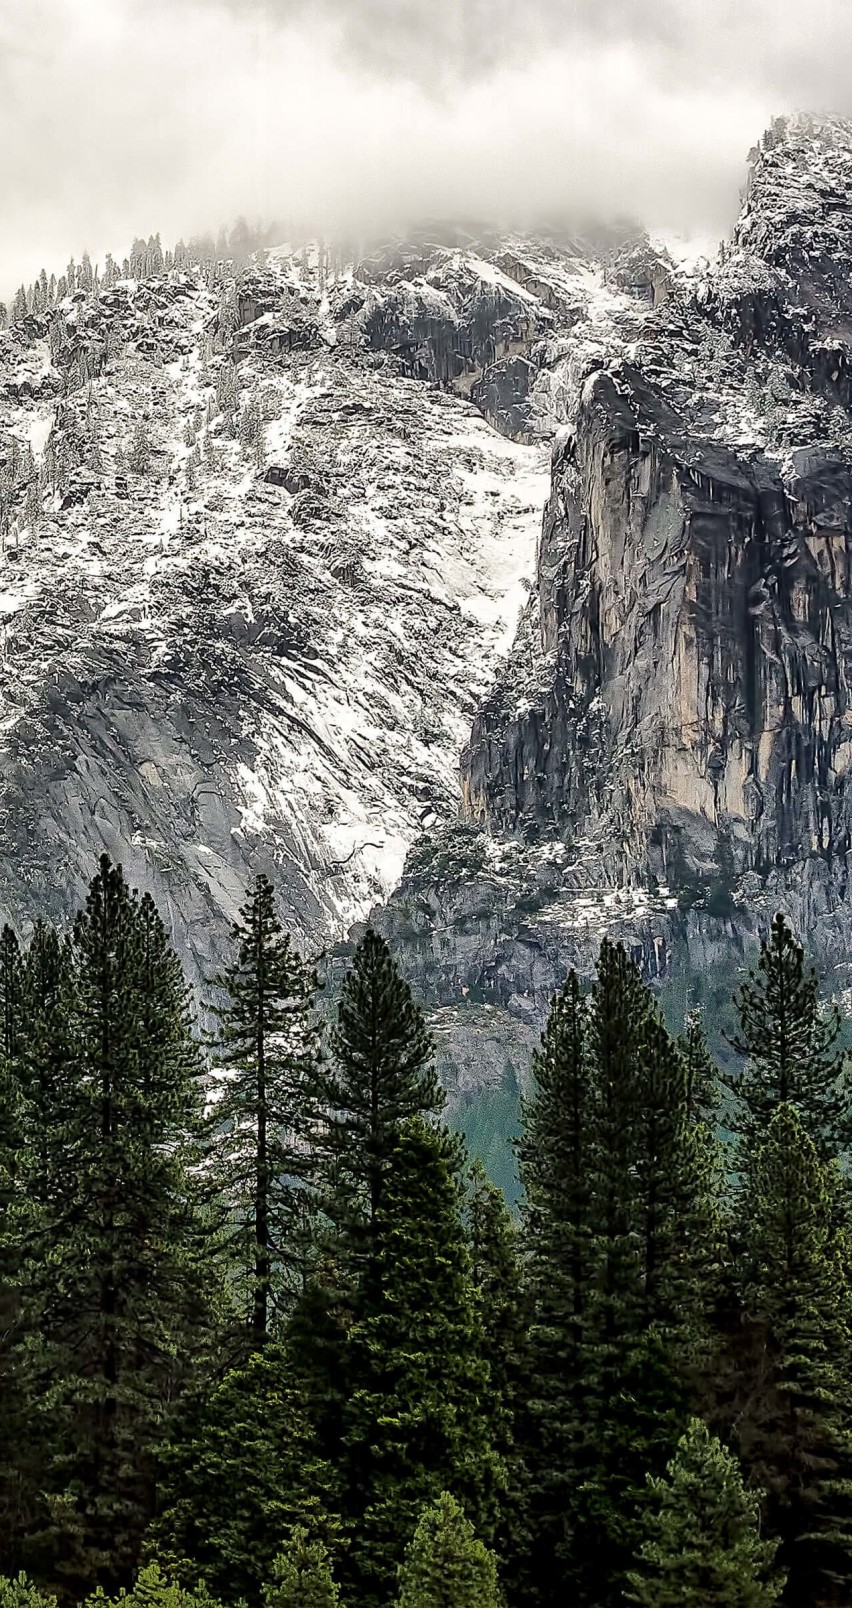 Winter Day at Yosemite National Park Wallpaper for Apple iPhone 6 / 6s